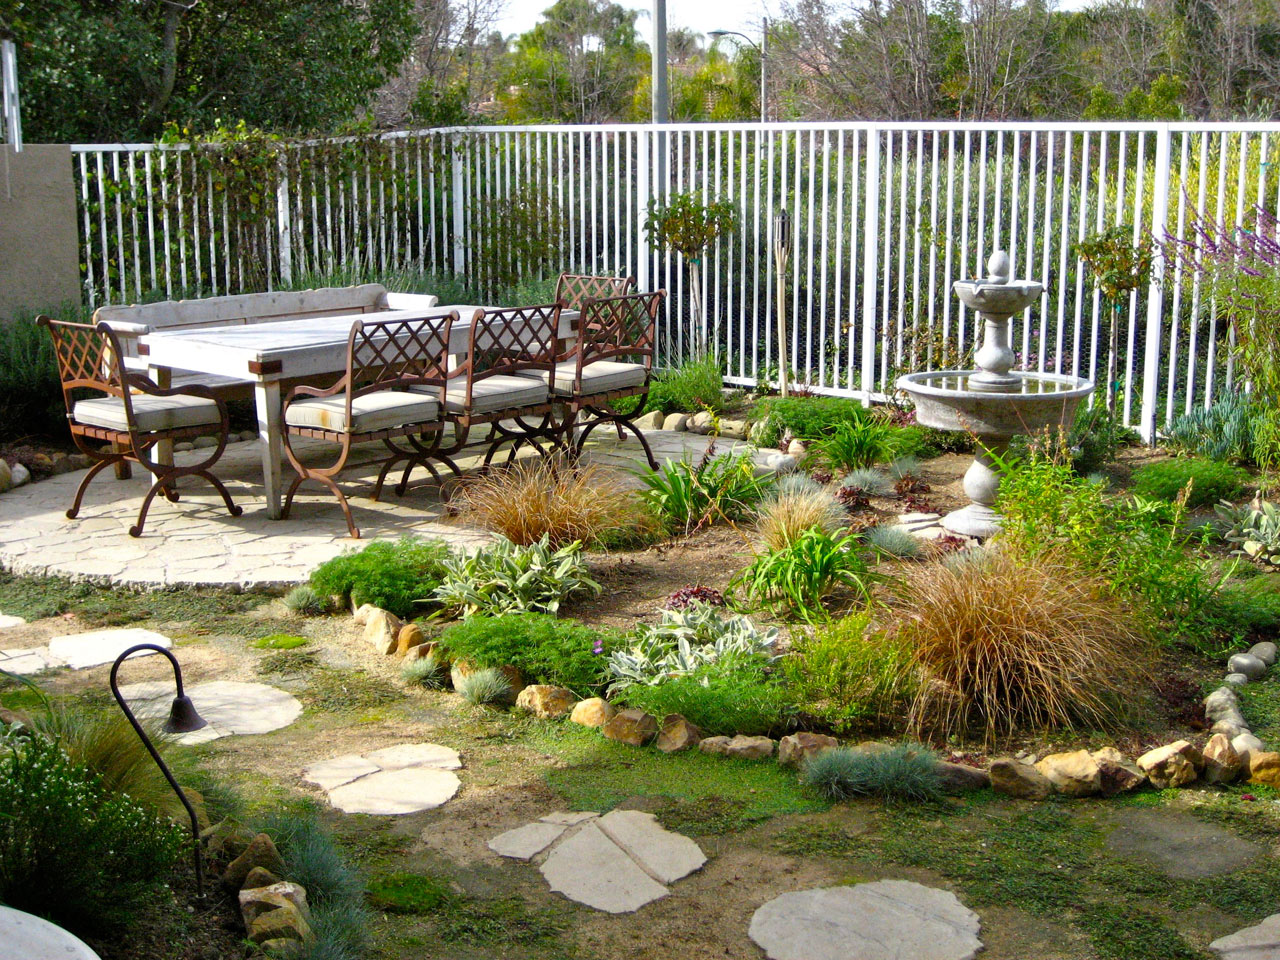 Backyard Landscaping Small Small Backyard Landscaping Design With Small Green Garden Completed With Water Fountain And Outdoor Furniture Design Backyard Small Backyard Landscaping Concept To Add Cute Detail In House Exterior